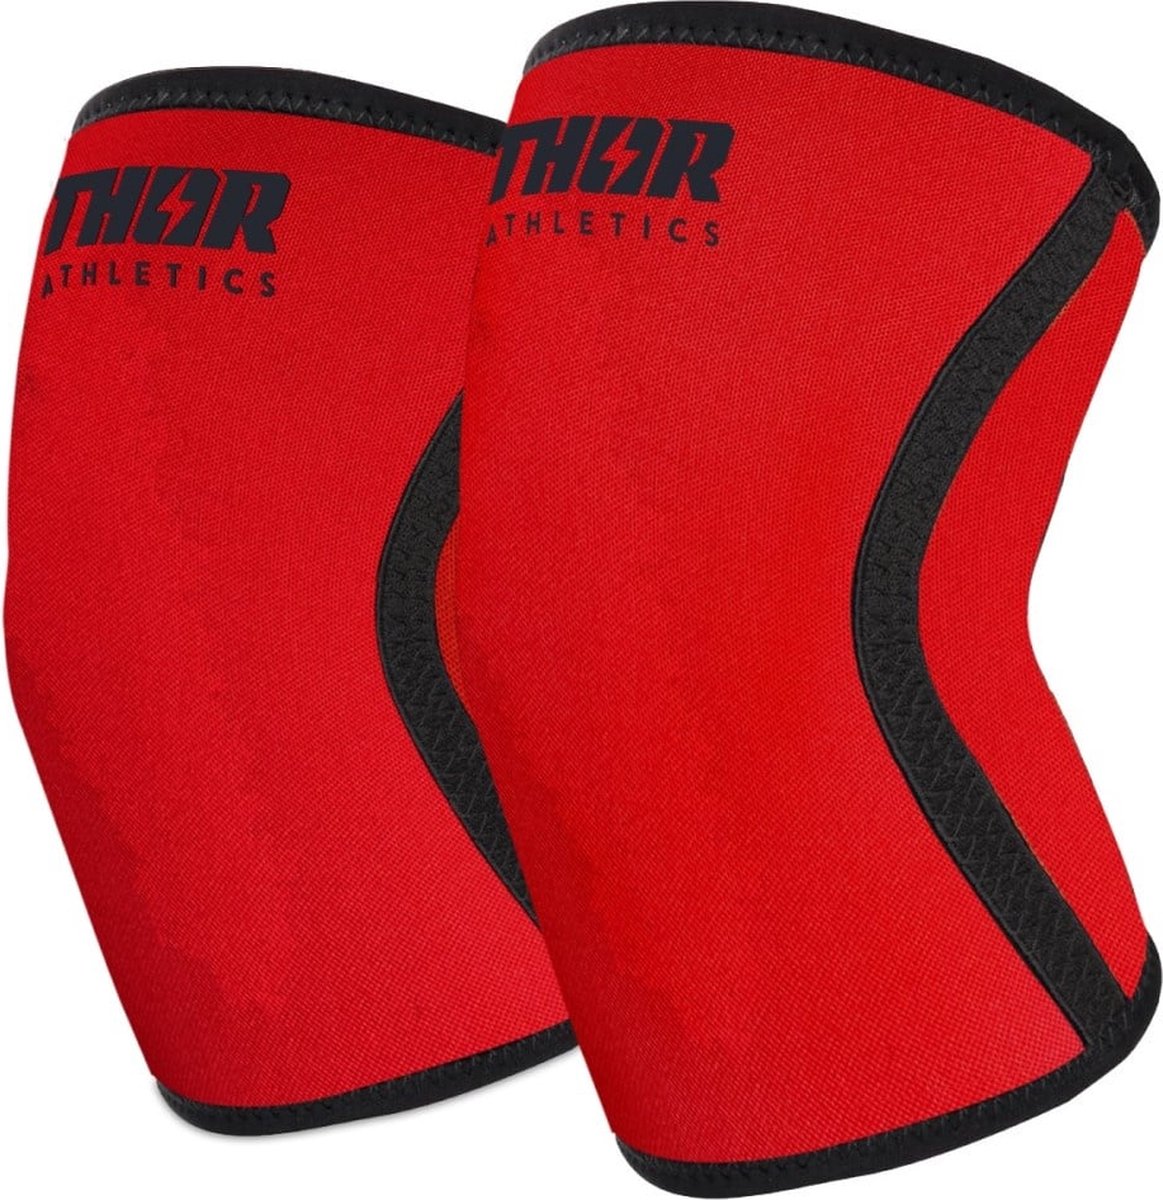 Thor Athletics - Knee Sleeves Rood - 7MM - Krachttraining Accessoires - Powerlifting - Bodybuilding - Squat - Maat XS